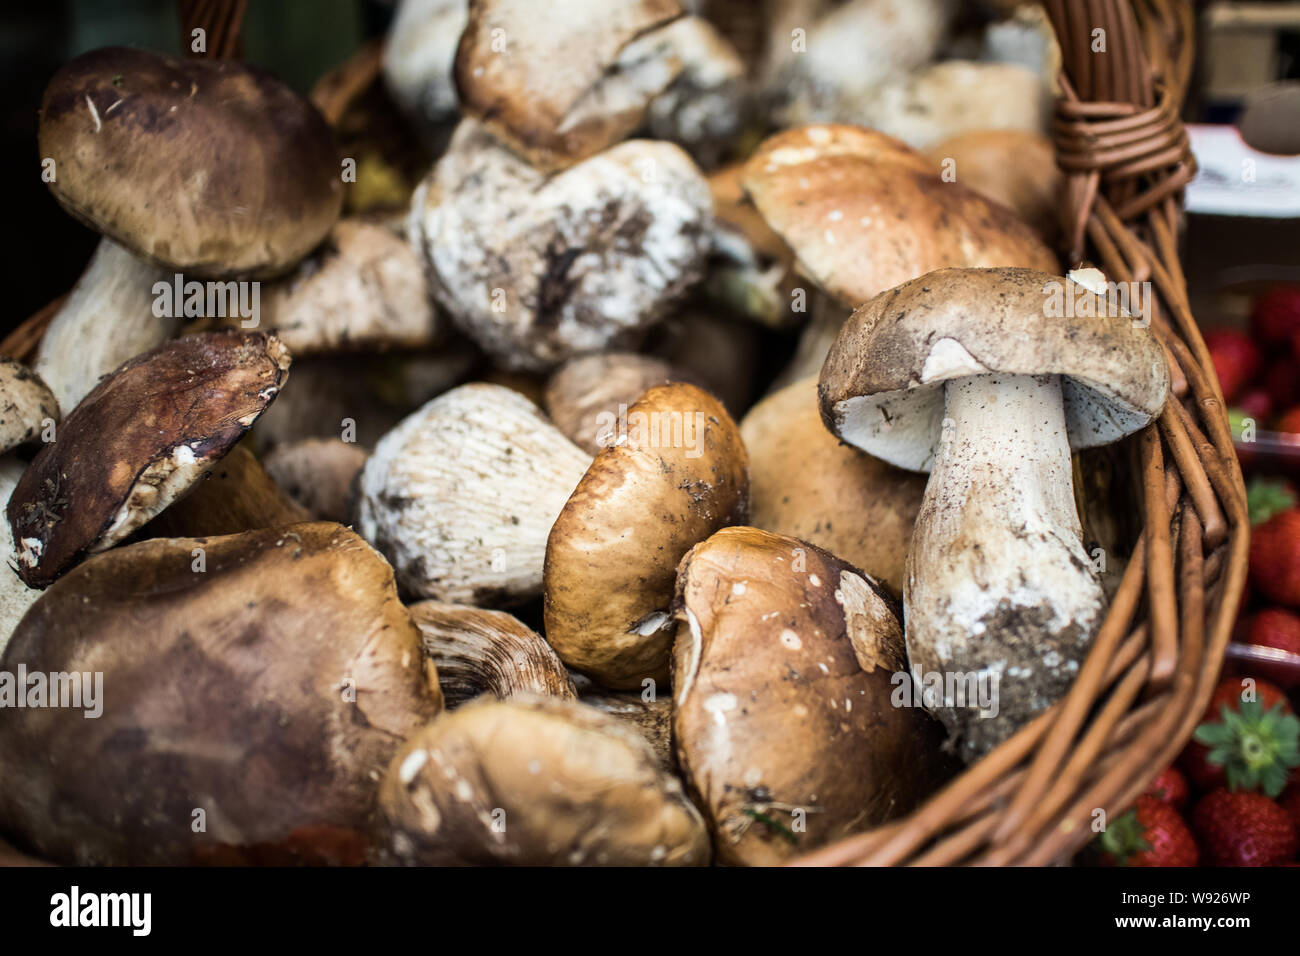 Mushrooms in a basket Stock Photo